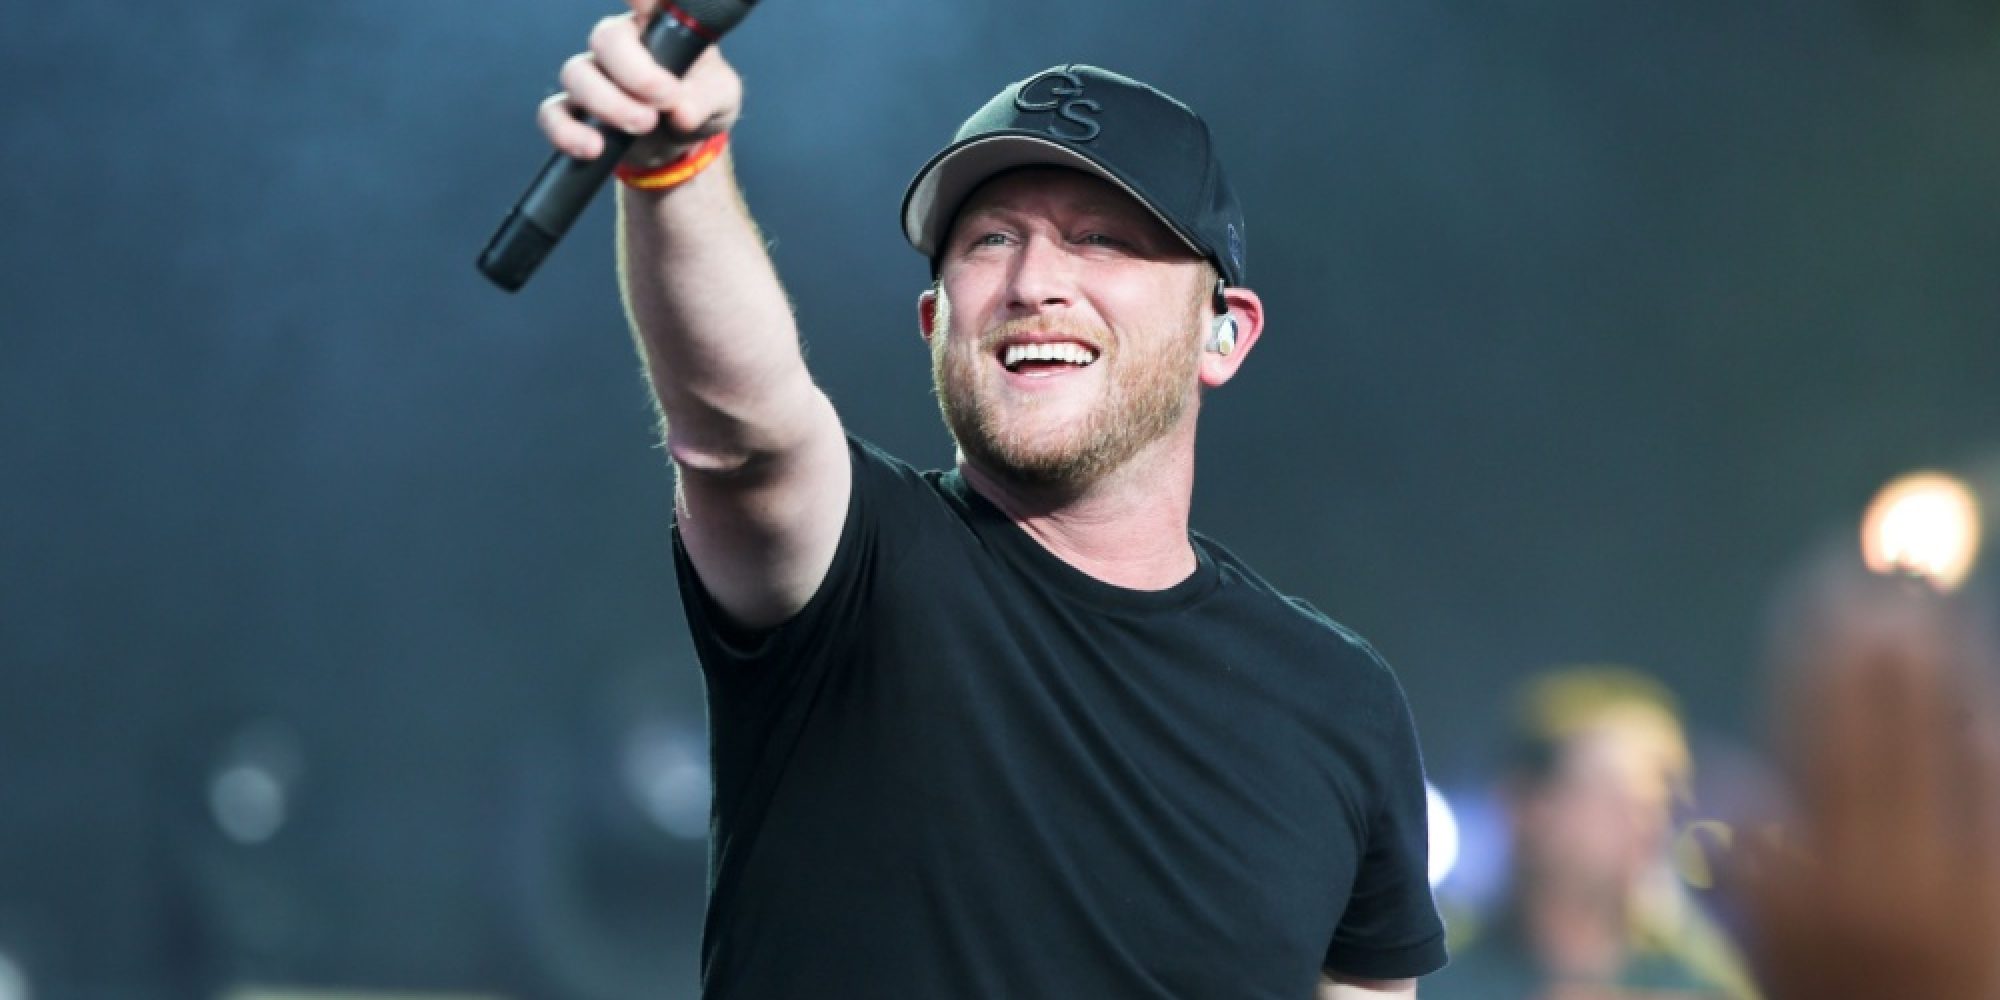 Cole Swindell drops his new song “Forever To Me”